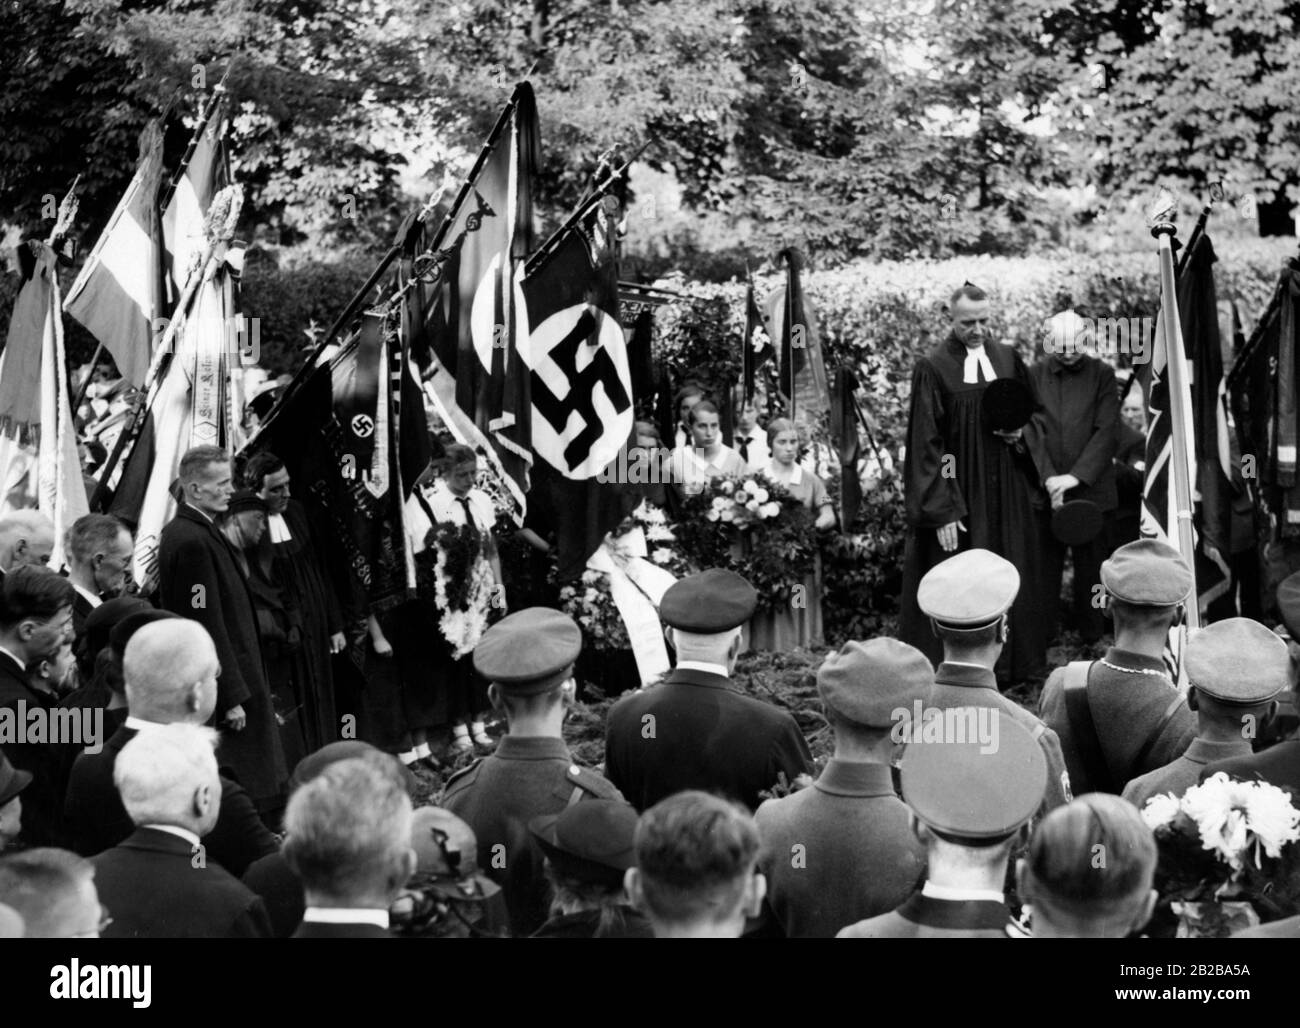 Funeral of the parish priest of Pankow-Niederschoenhausen on 10.09.1934. Next to the tomb are standing flag bearers with swastika flags. Stock Photo